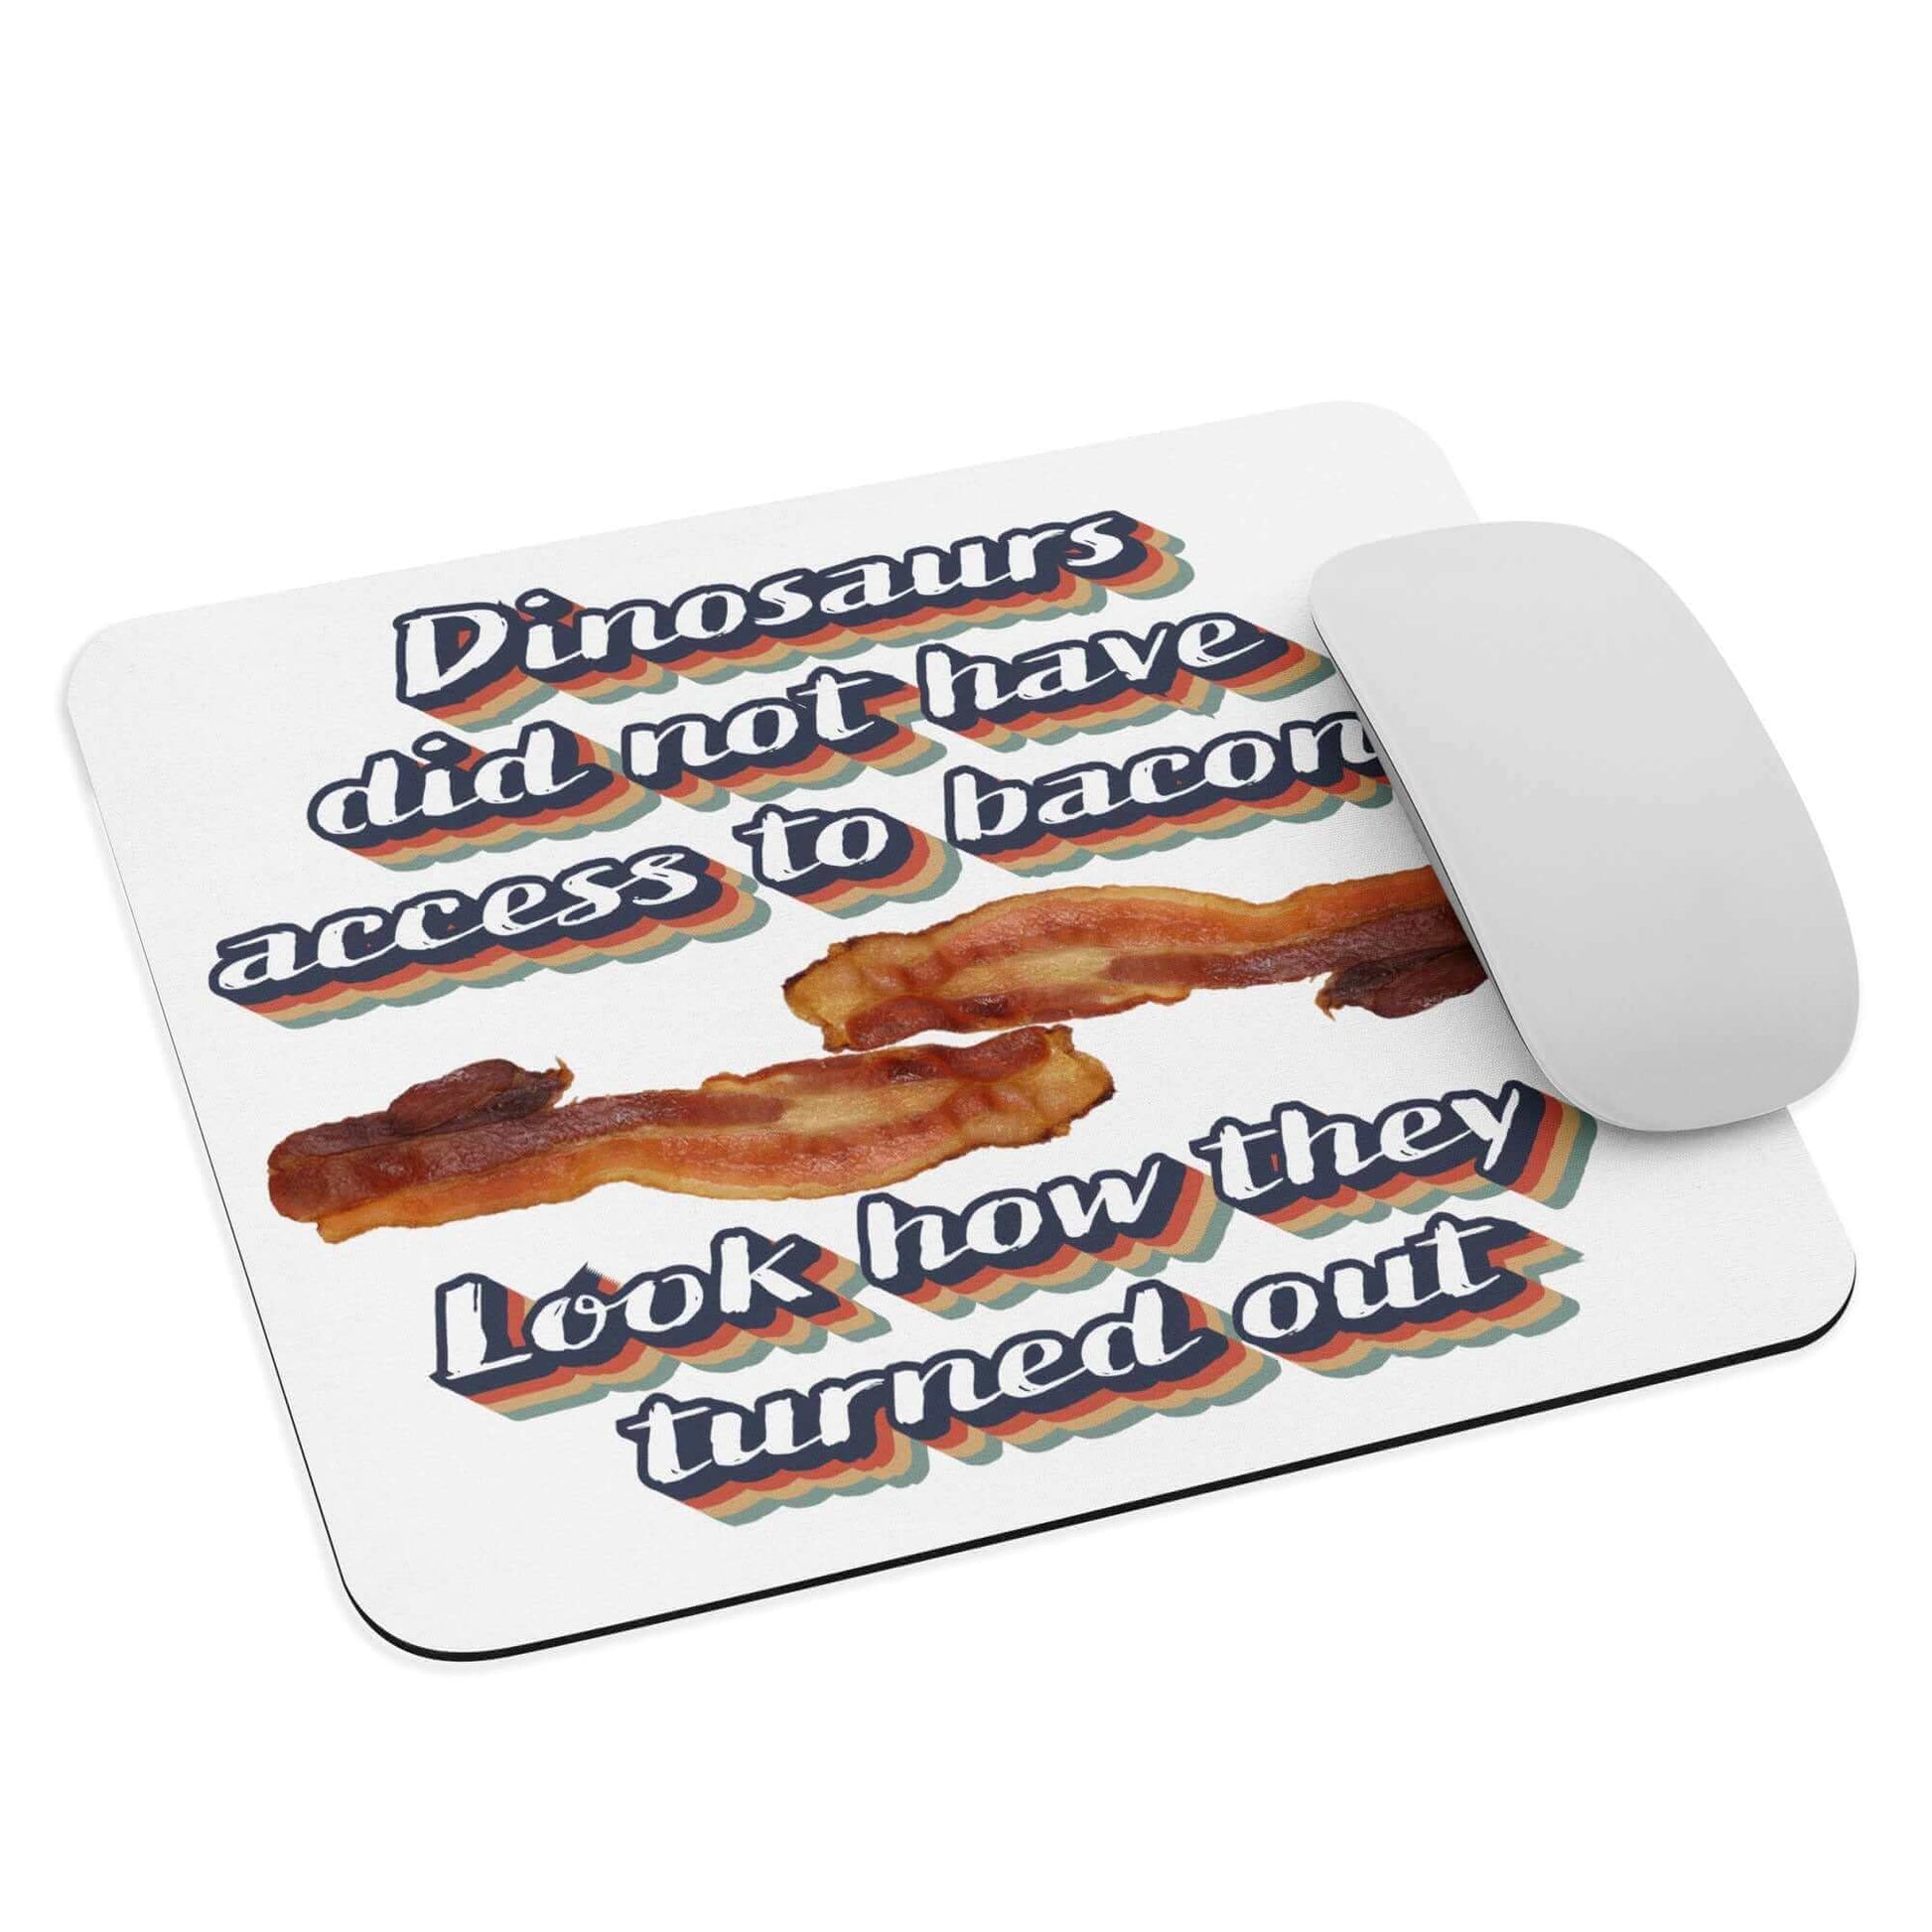 Dinosaurs did not have access to bacon.. Look how they turned out - Mouse pad - Horrible Designs